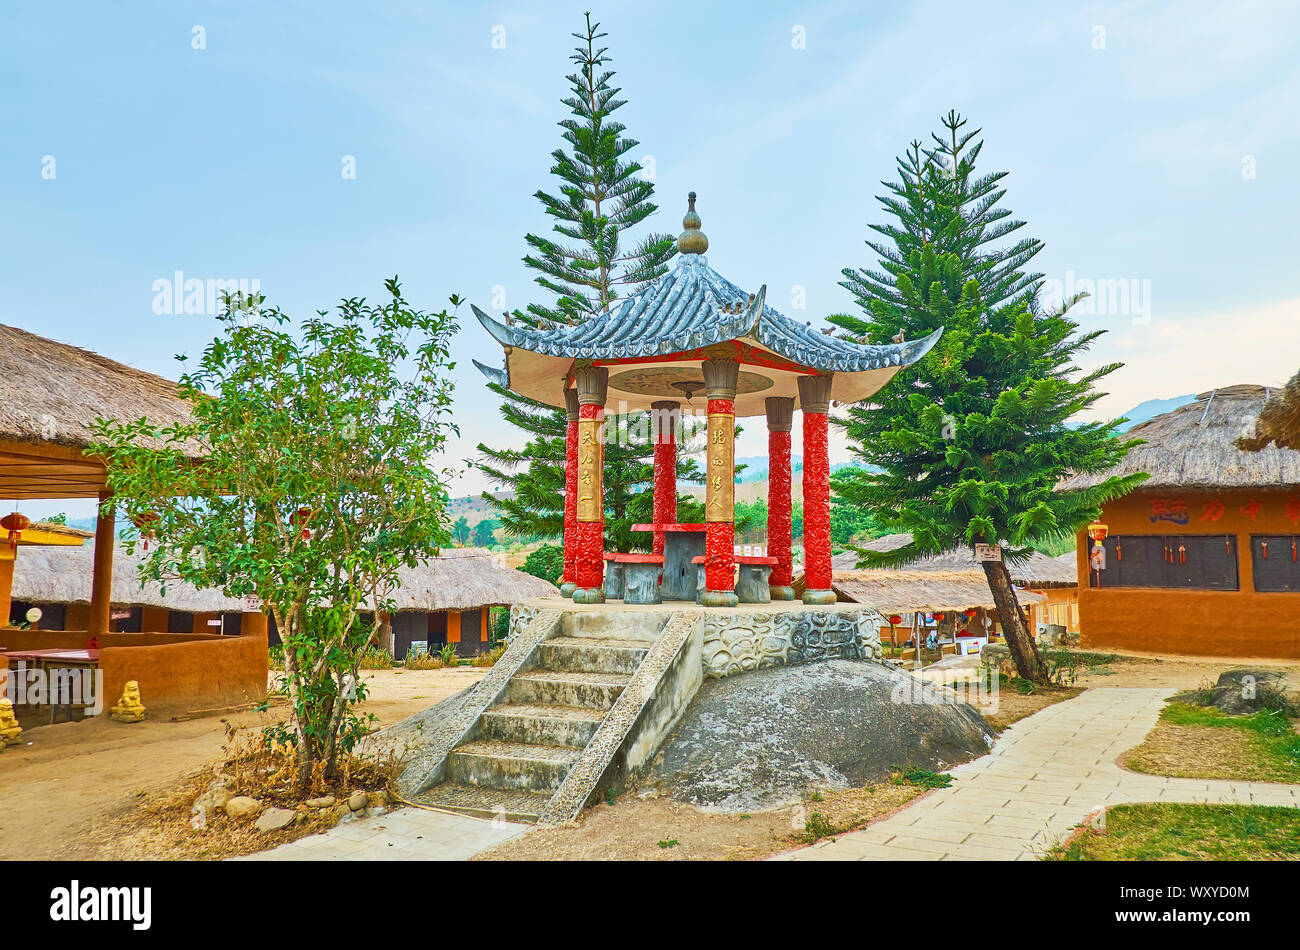 SANTICHON, THAILAND - MAY 5, 2019: The small pavilion with sweeping roof and carved red columns, standing on the pedestal in Chinese Cultural Center p Stock Photo